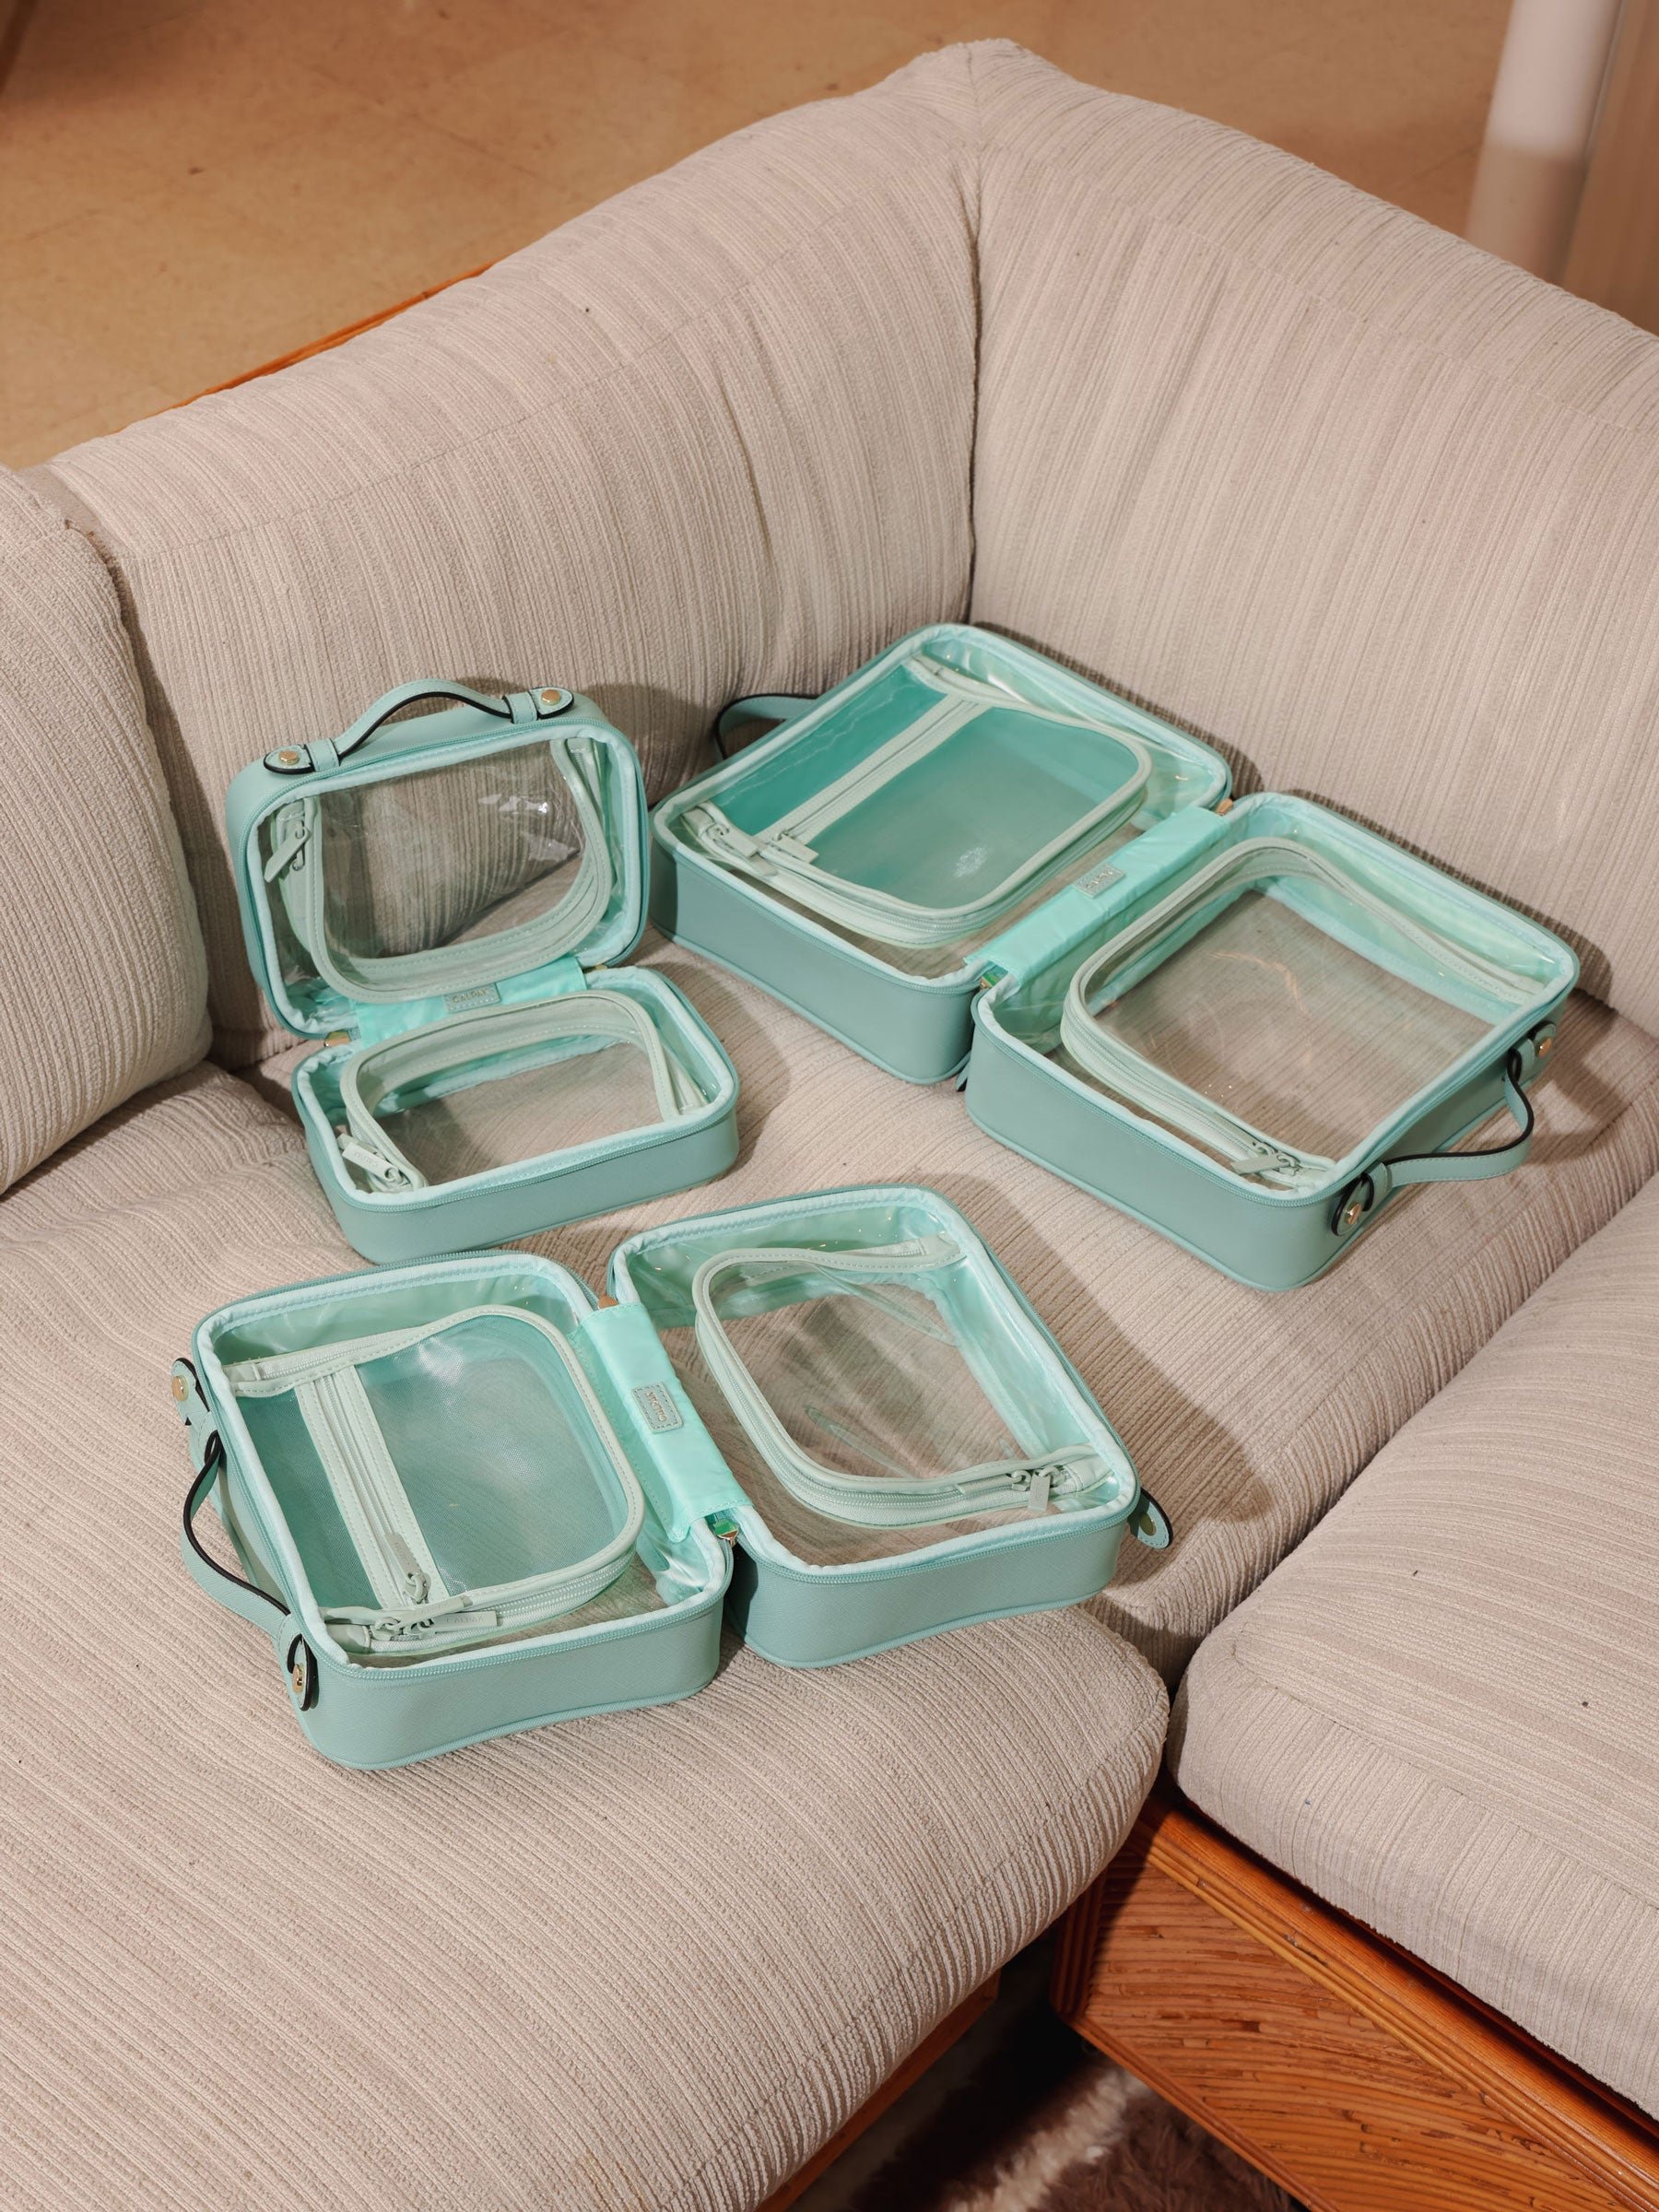 CALPAK clear makeup cases with zippered compartments in small, medium and large sizes in light blue